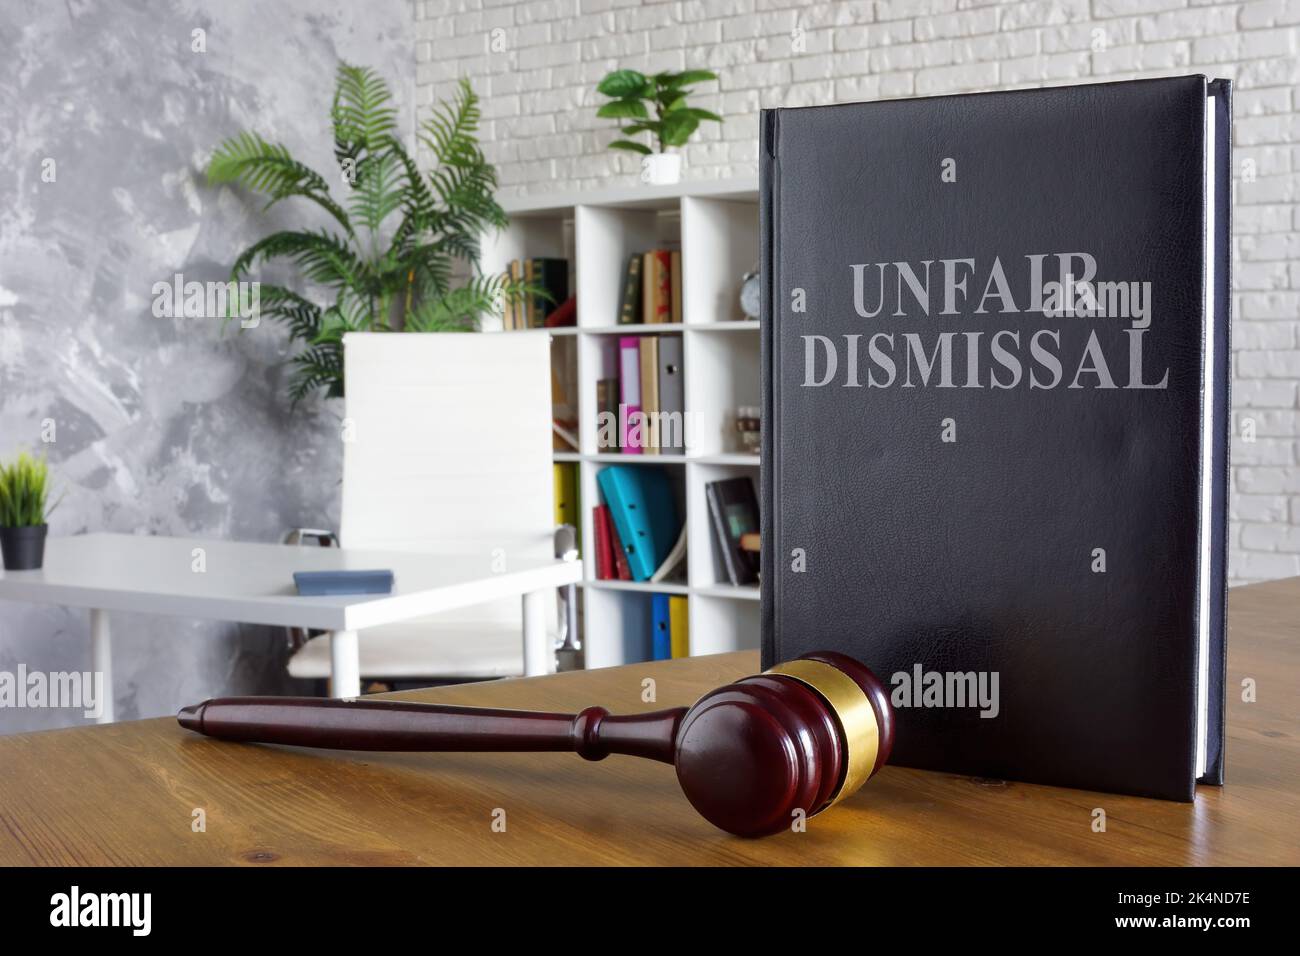 Book about unfair dismissal and gavel near. Stock Photo